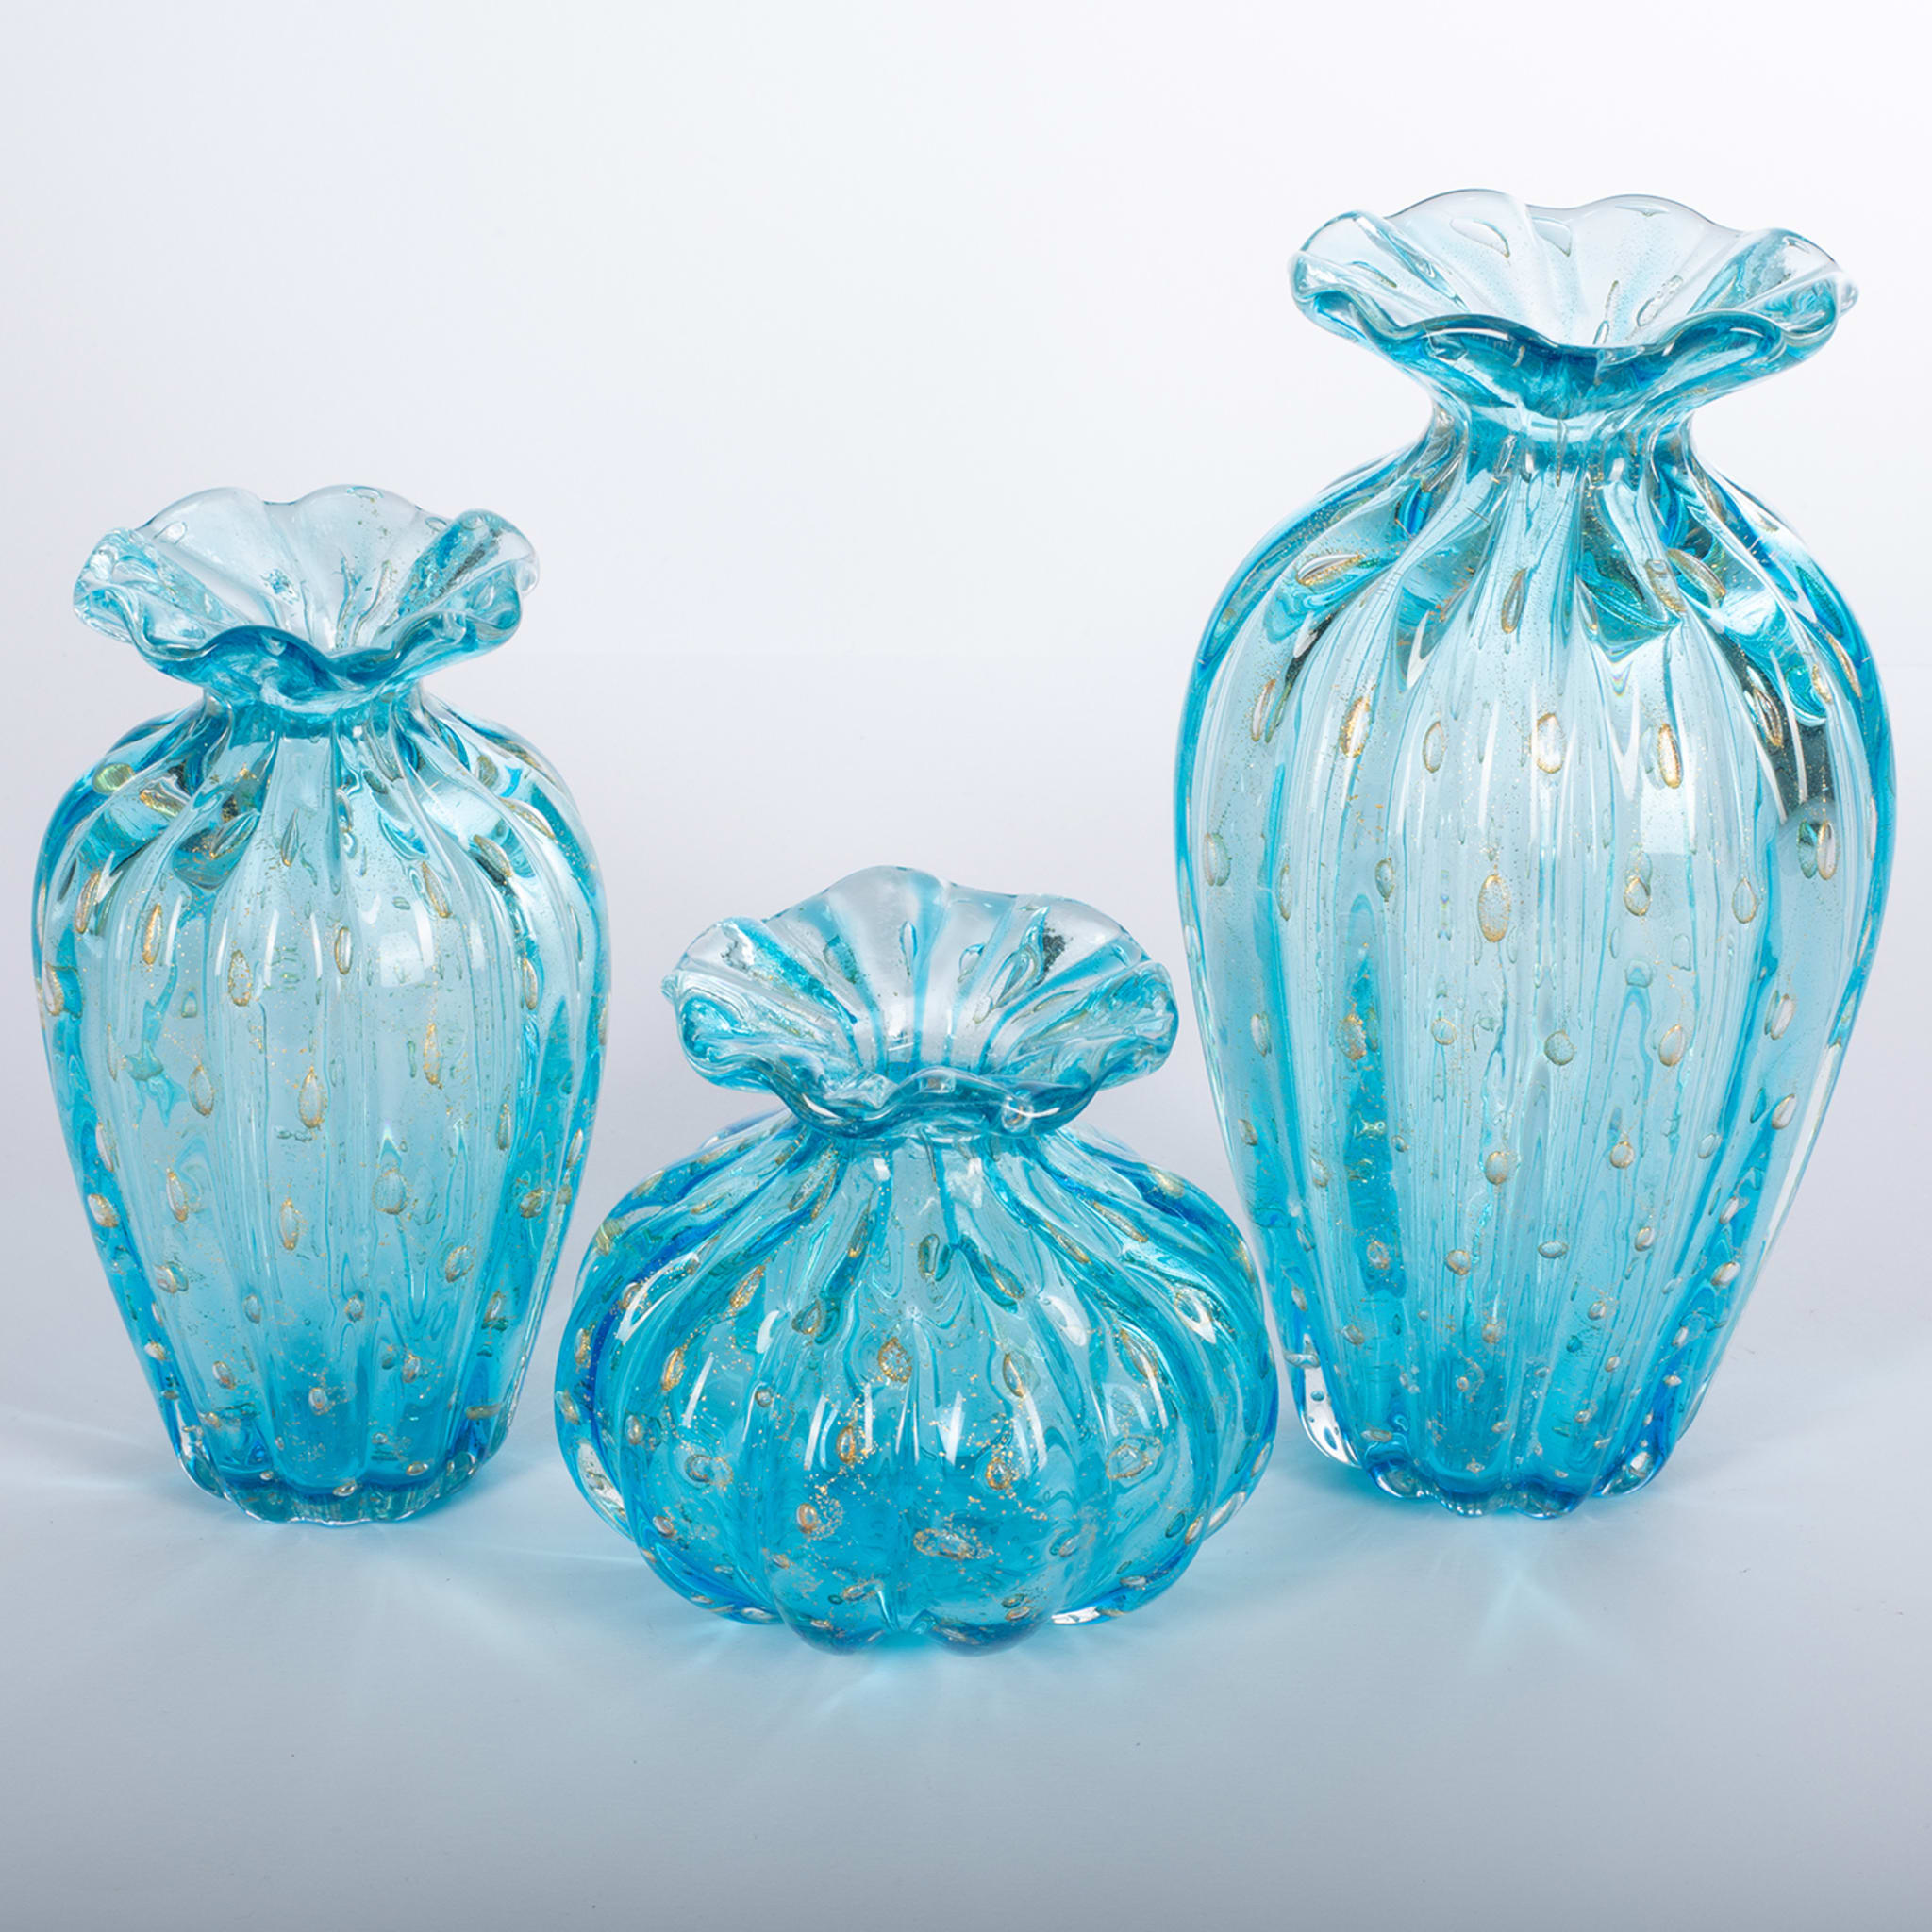 1950 Light-Blue Set of 3 Vases with Gold Bubbles - Alternative view 2